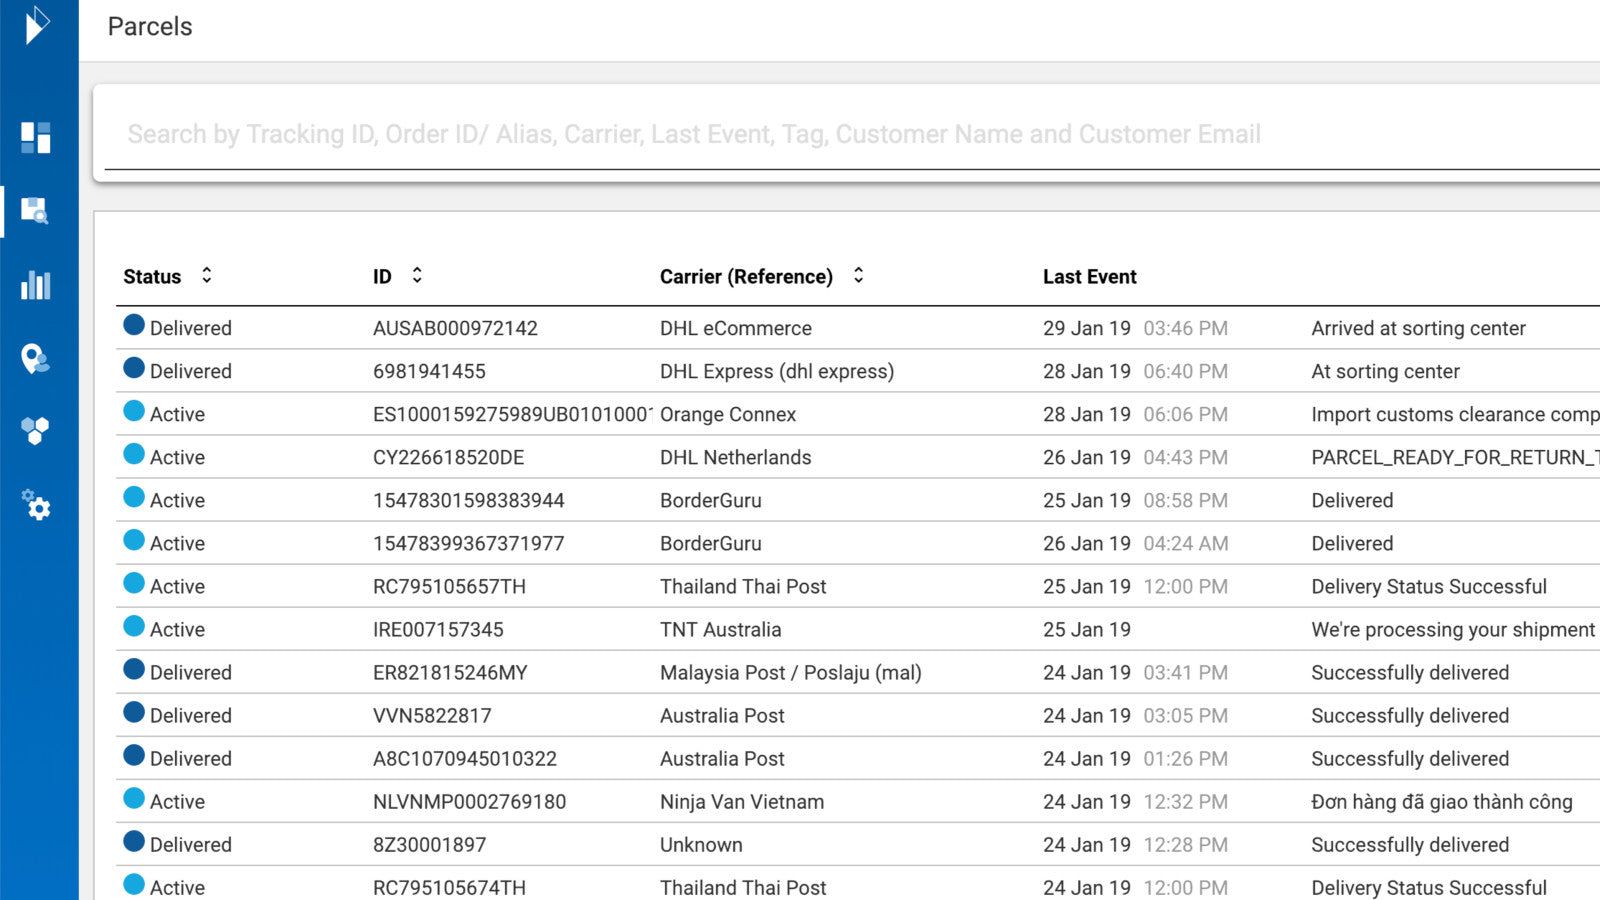 Customer service interface tool with an overview of all parcels